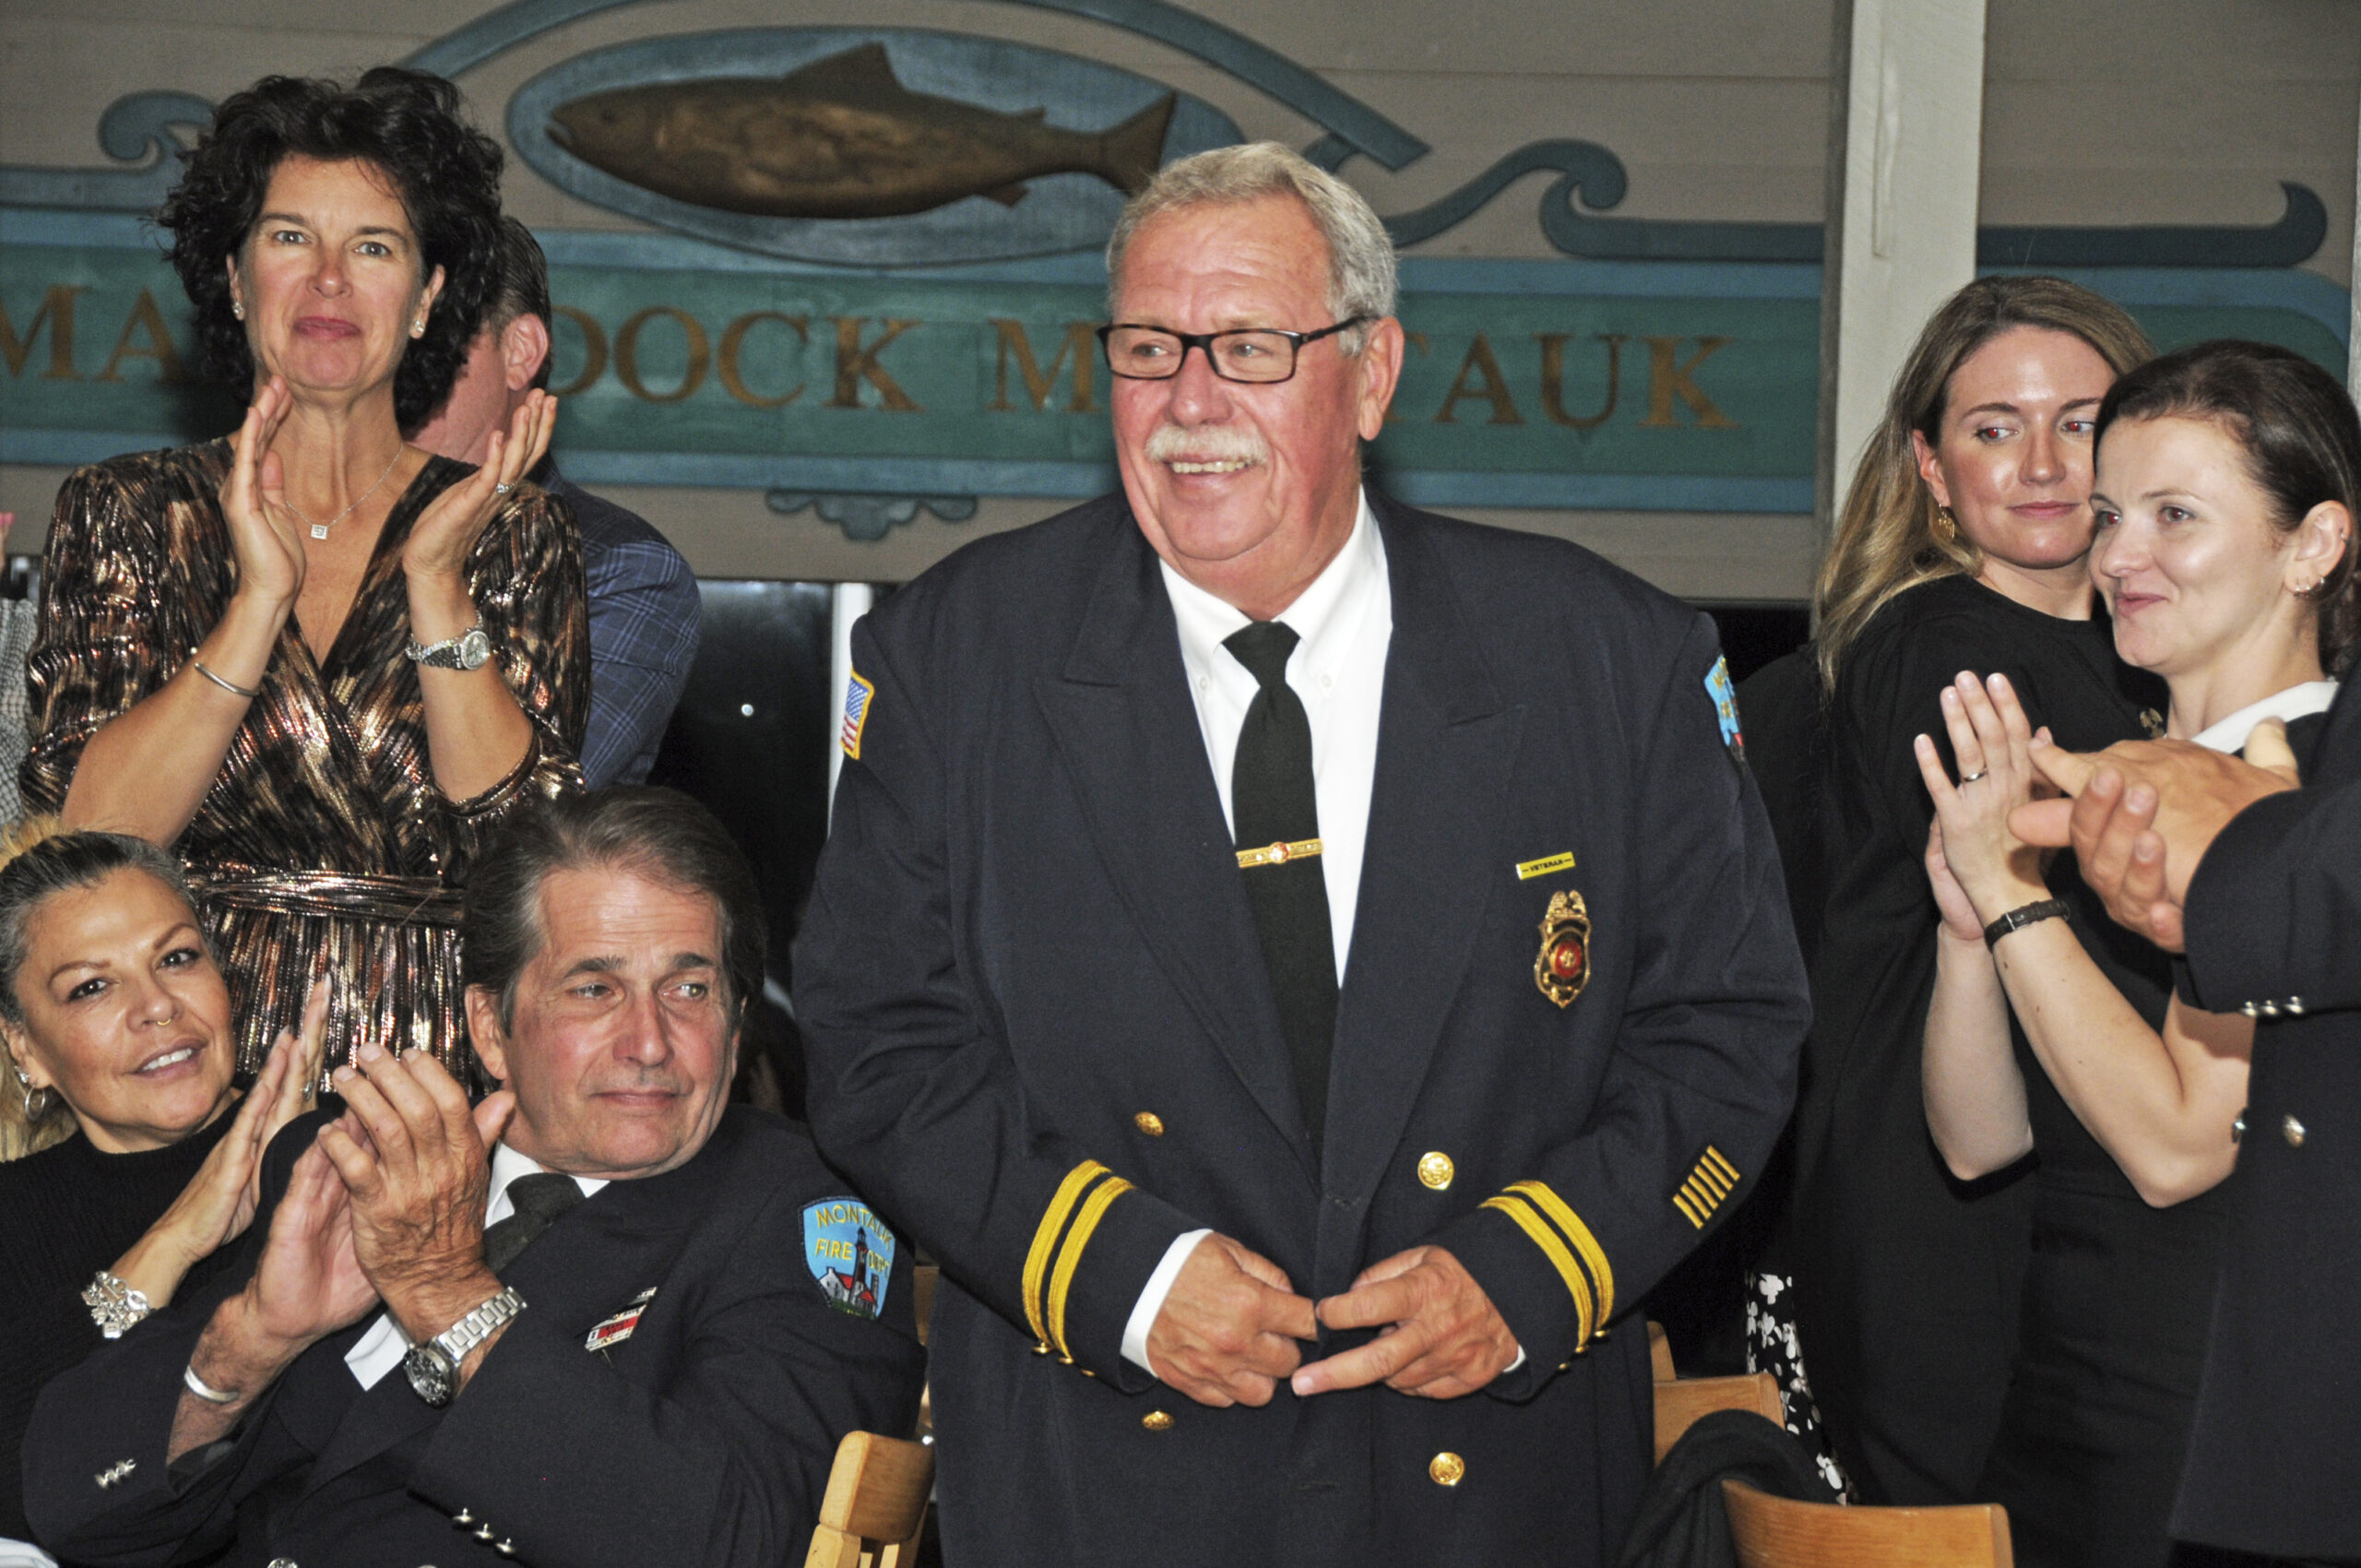 Captain Ed Ecker accepted the 2021 Company No. 6 Award for Company of the Year at the Montauk Fire Department's inspection dinner on Friday evening at at Gosman's Restaurant.  RICHARD LEWIN